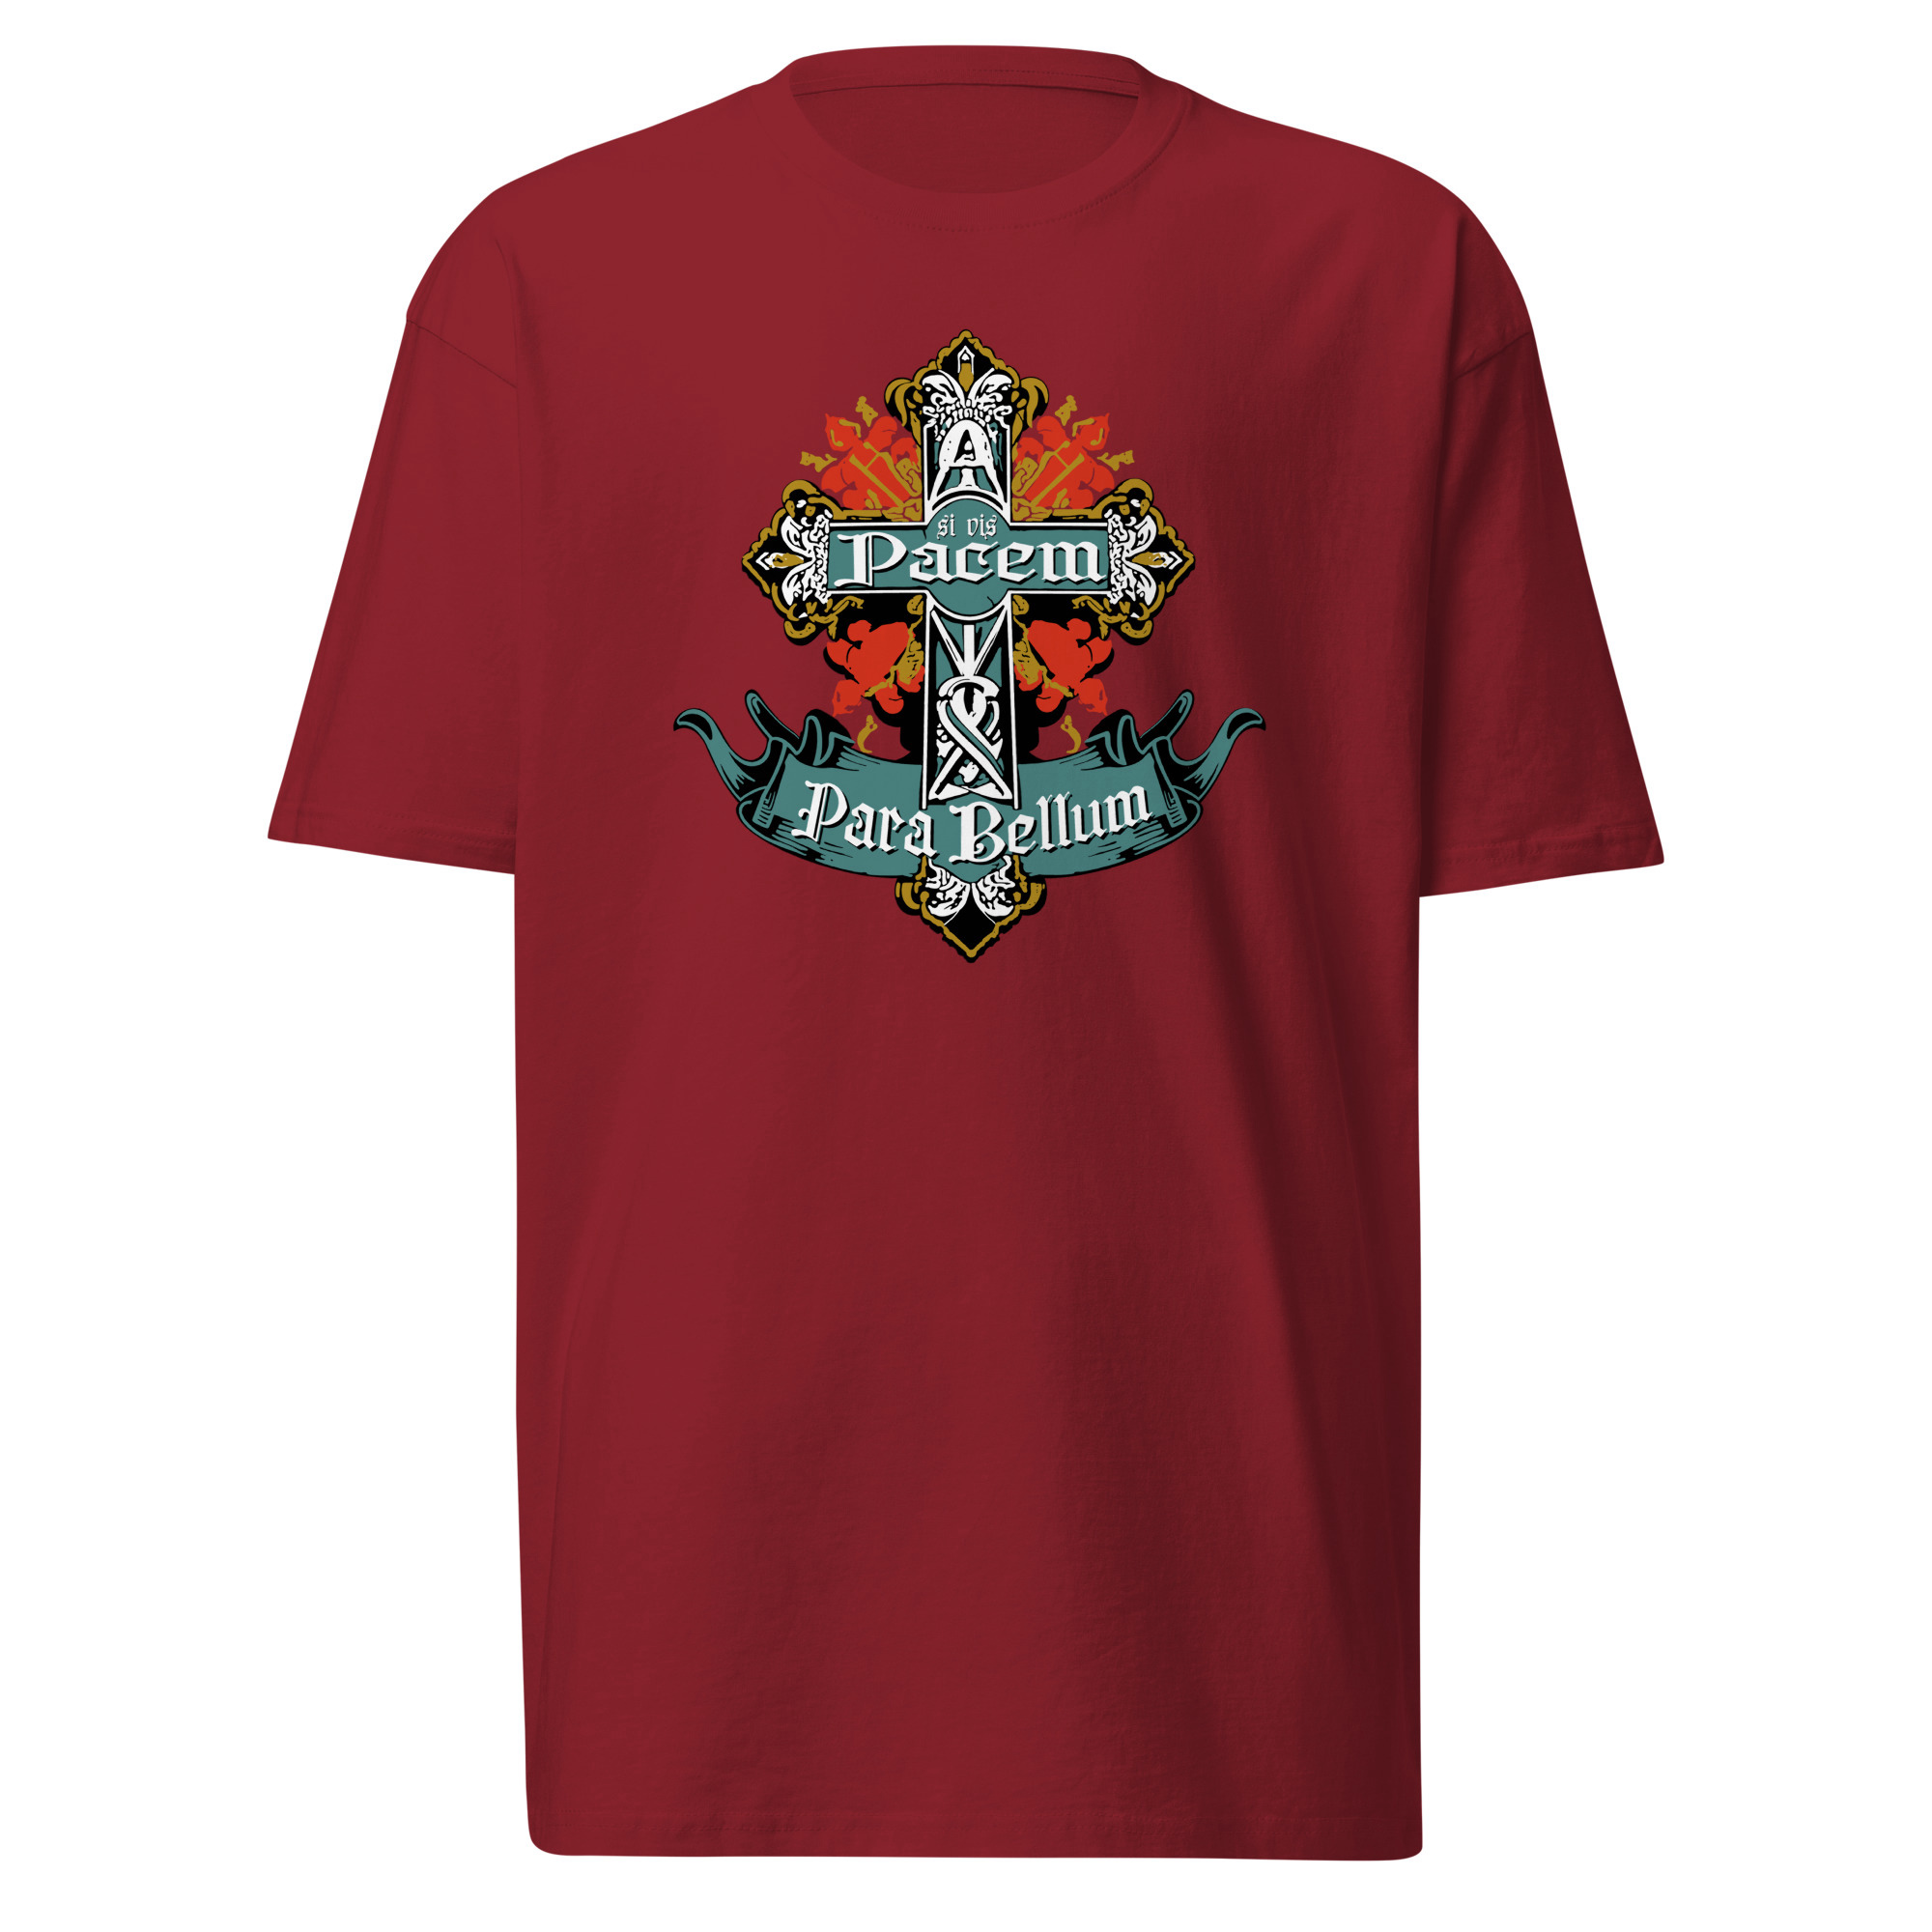 If You Want Peace, Prepare For War T-Shirt - Brick Red / M